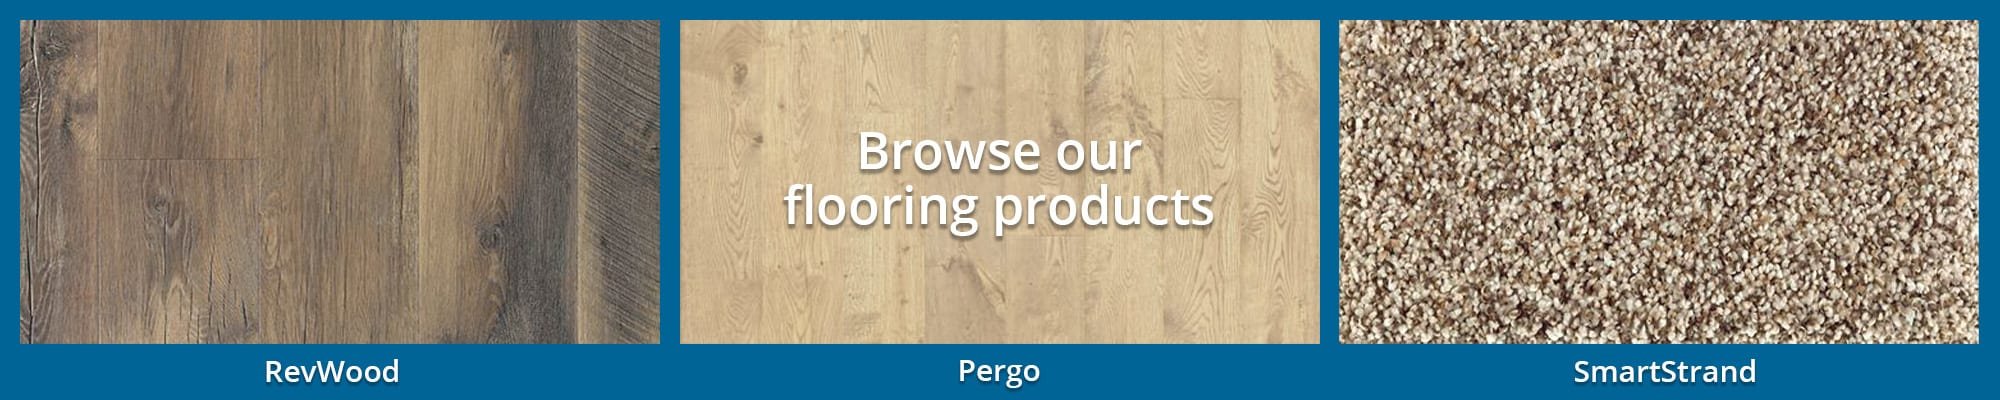 Browse our flooring products